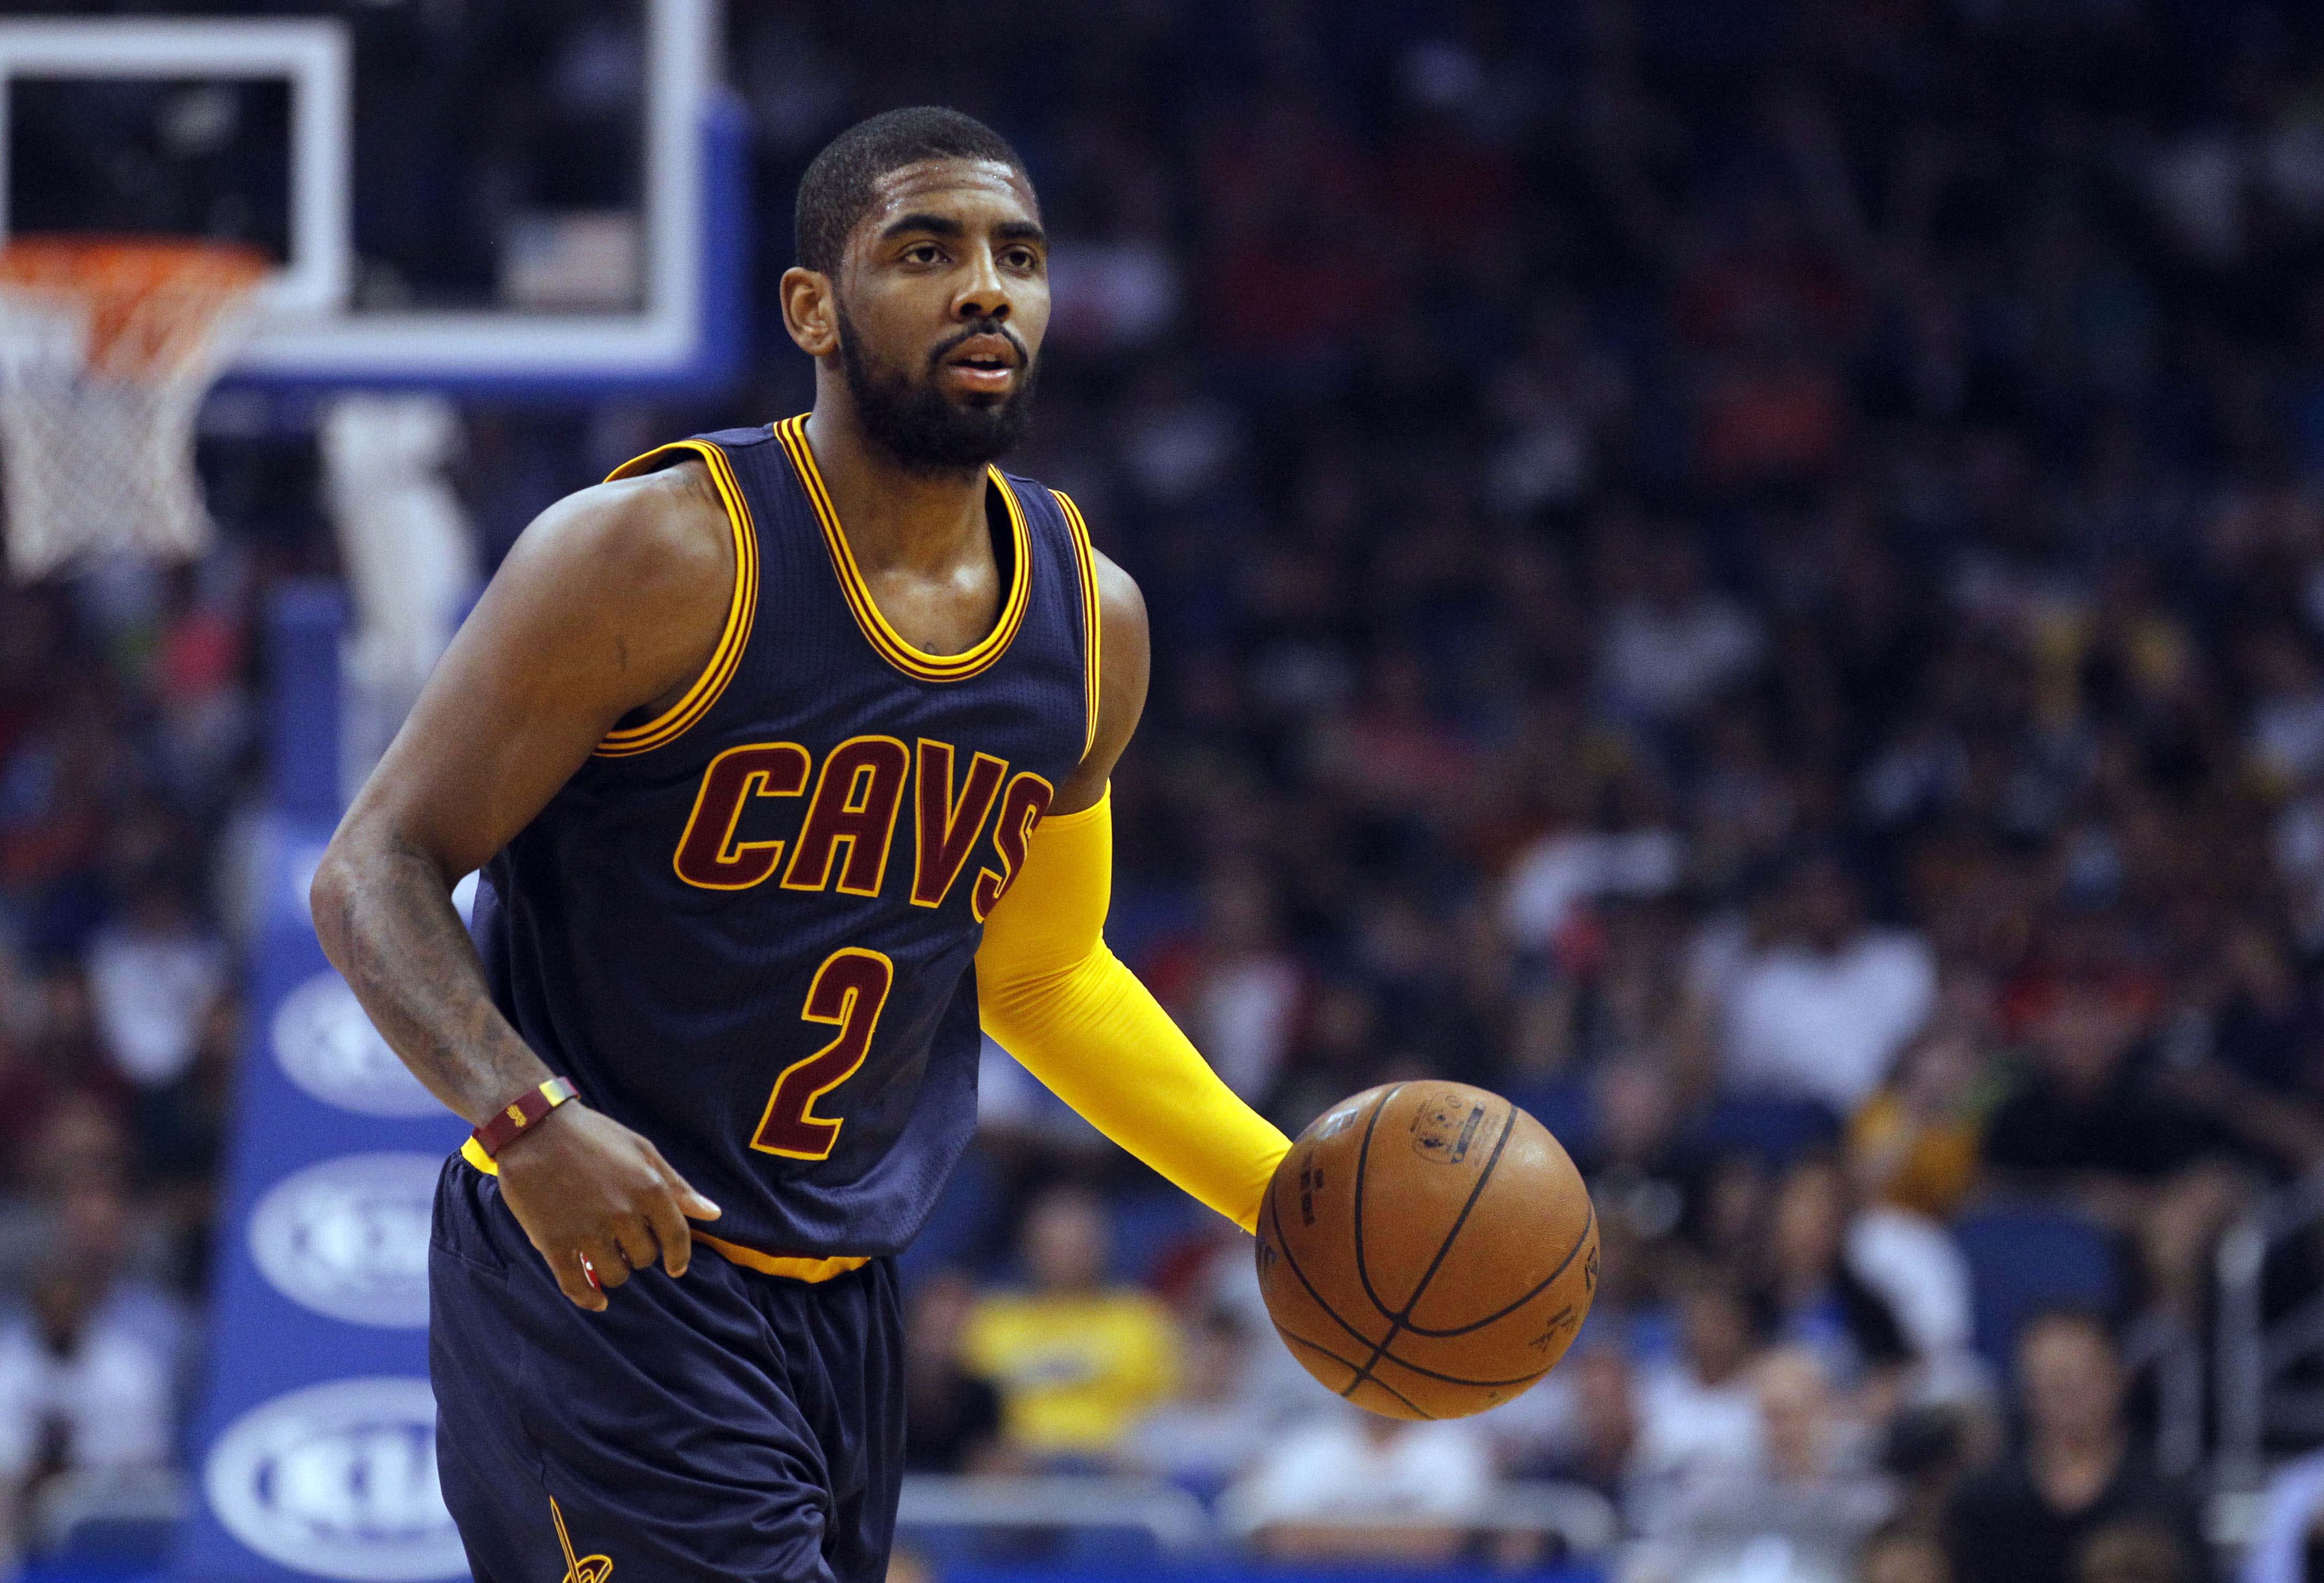 Kyrie Irving #14